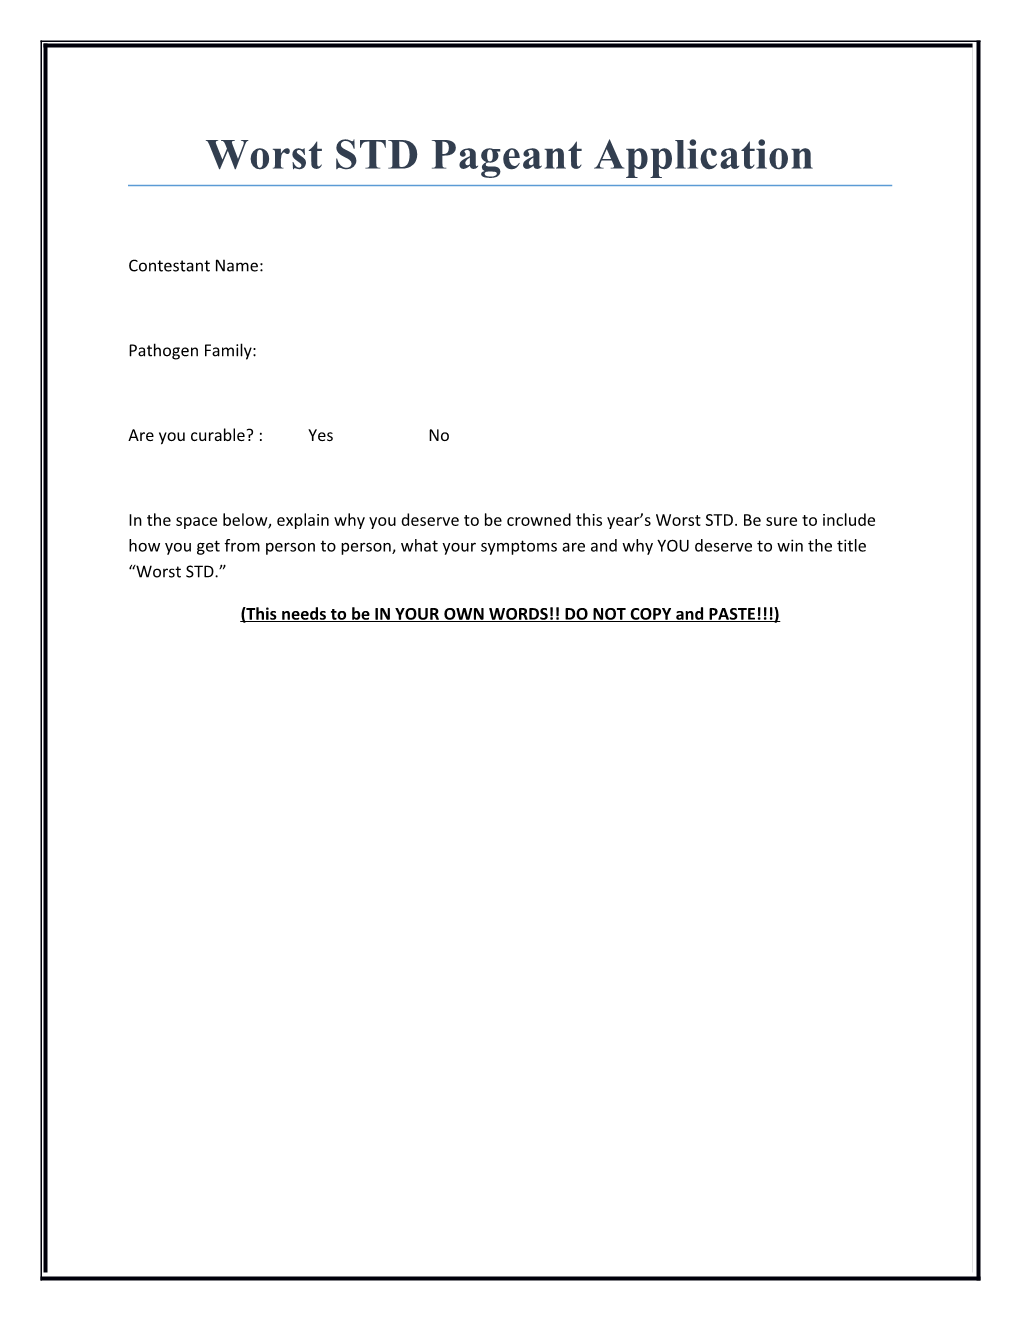 Worst STD Pageant Application